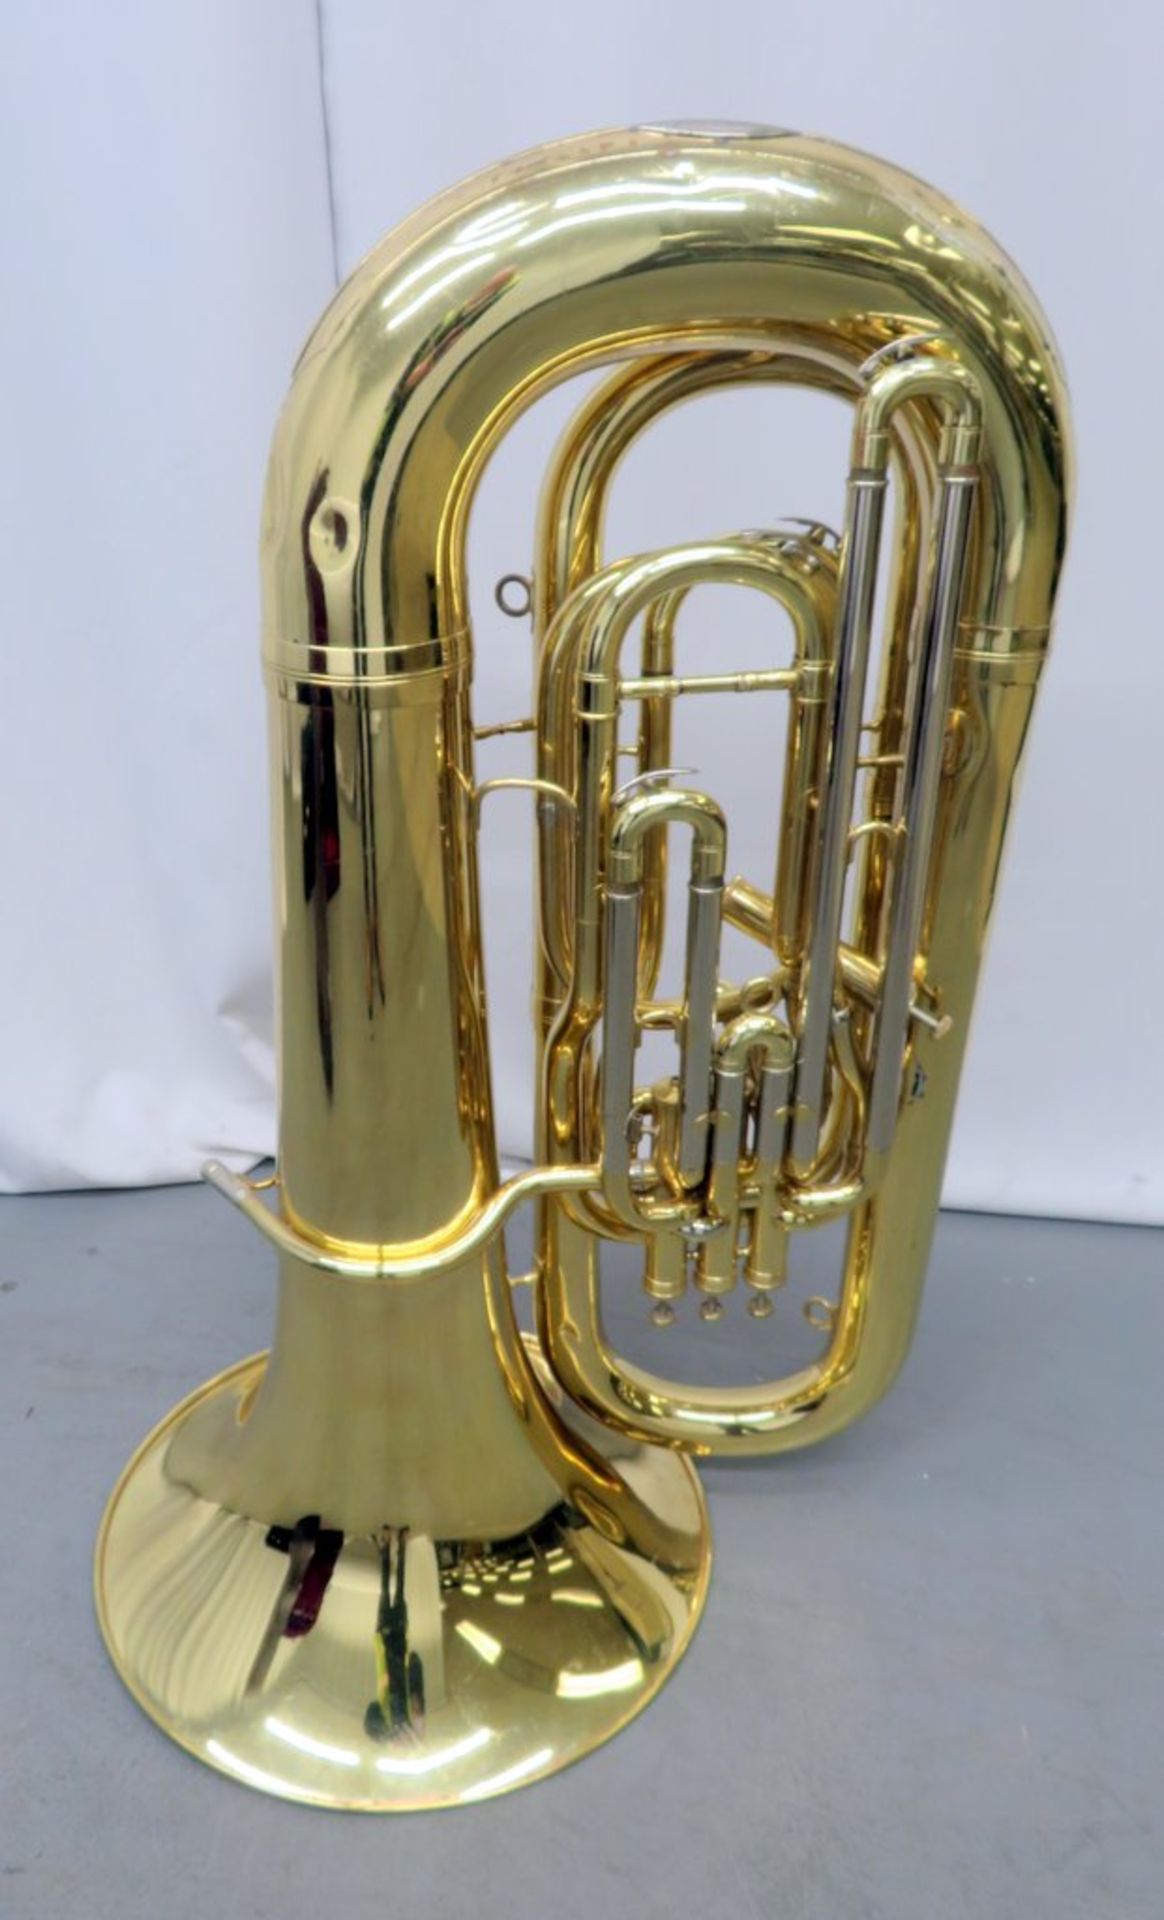 Besson BE994 Sovereign Bass Upright Tuba Complete With Case. - Image 4 of 23